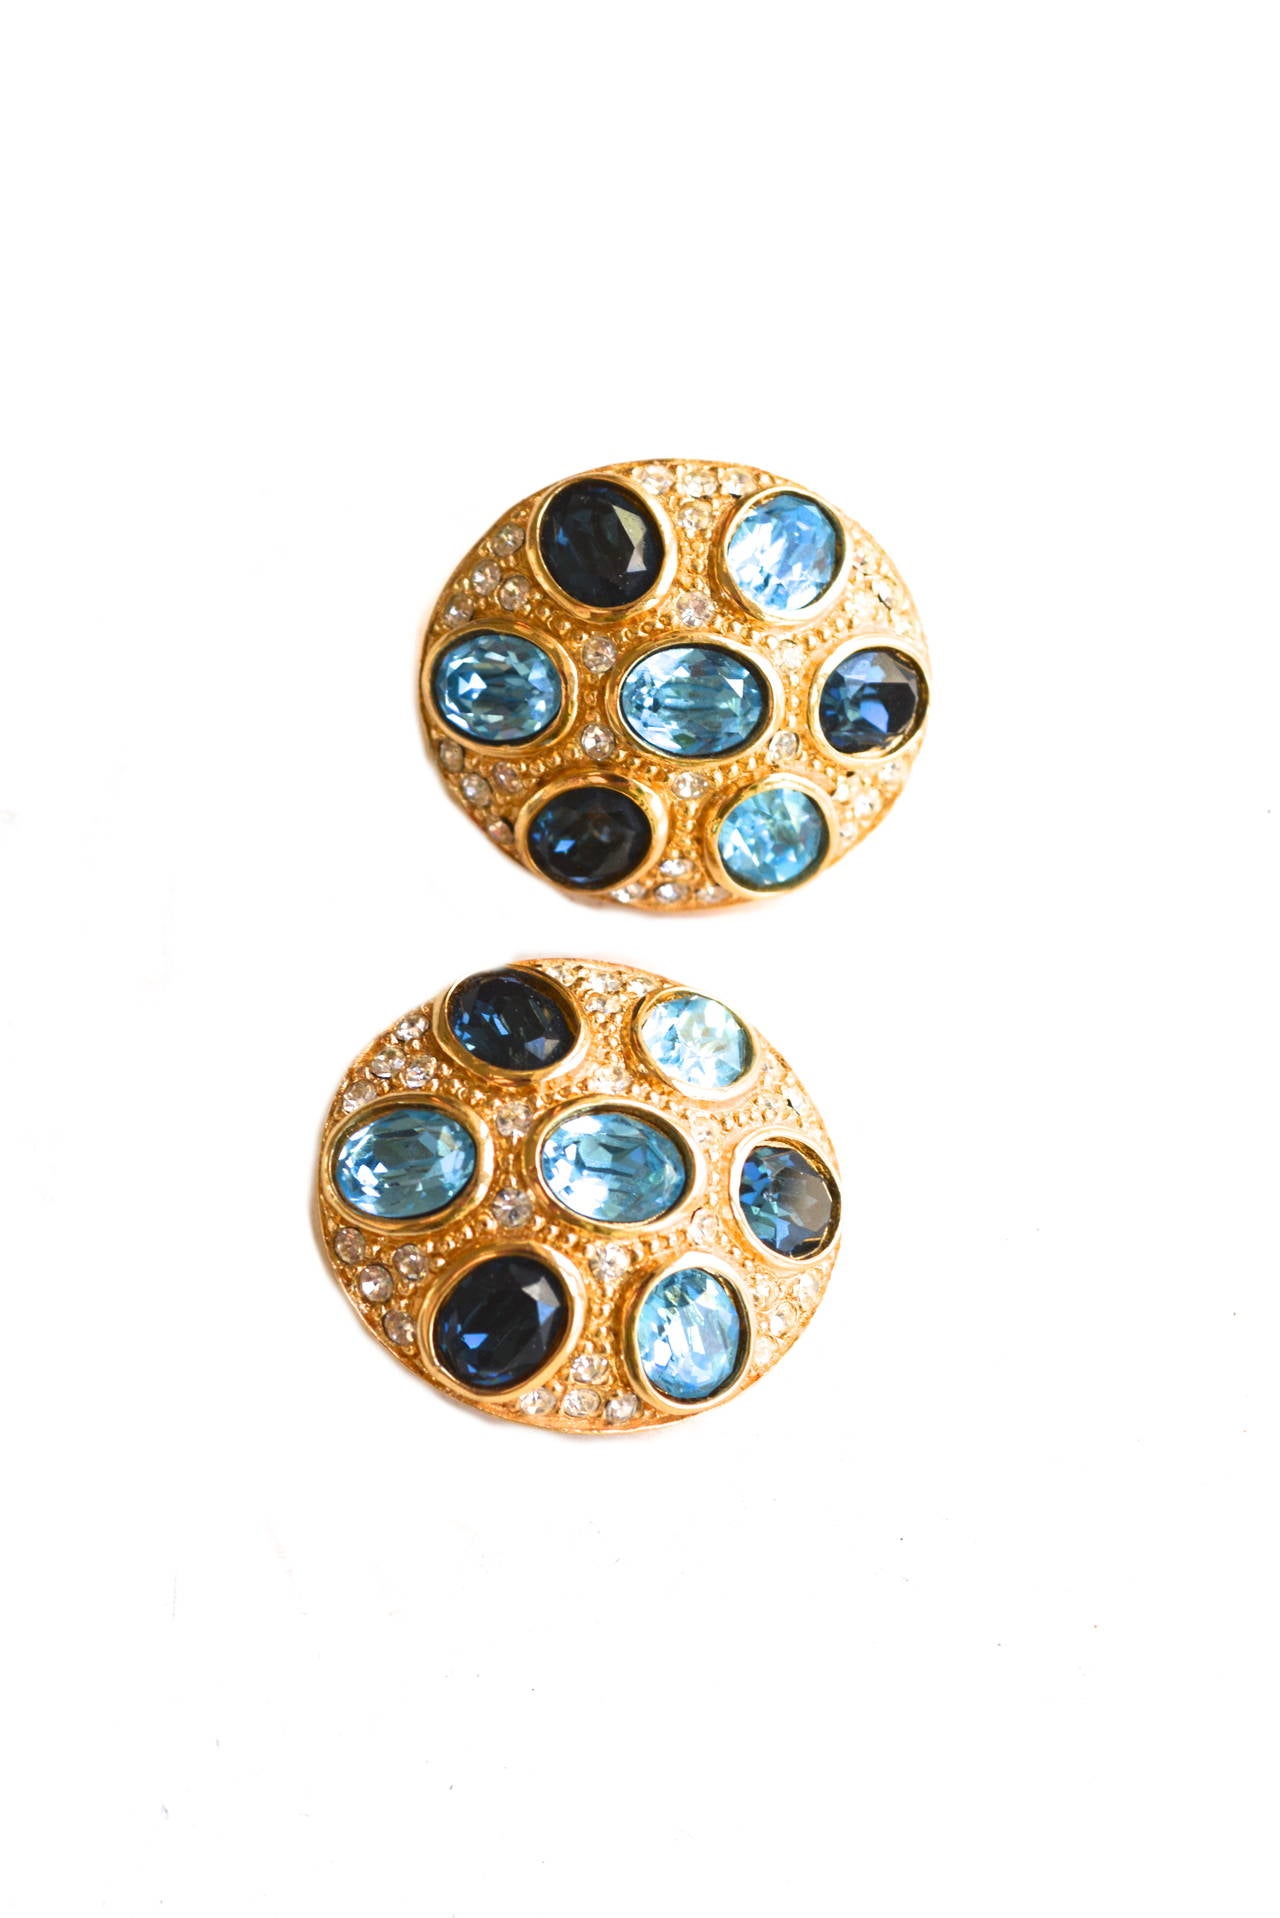 Pretty rhinestone and blue glass stone clip on earrings marked Christian Dior.  Golden metal finish and small paste stone details. Great chunky style without being too heavy.